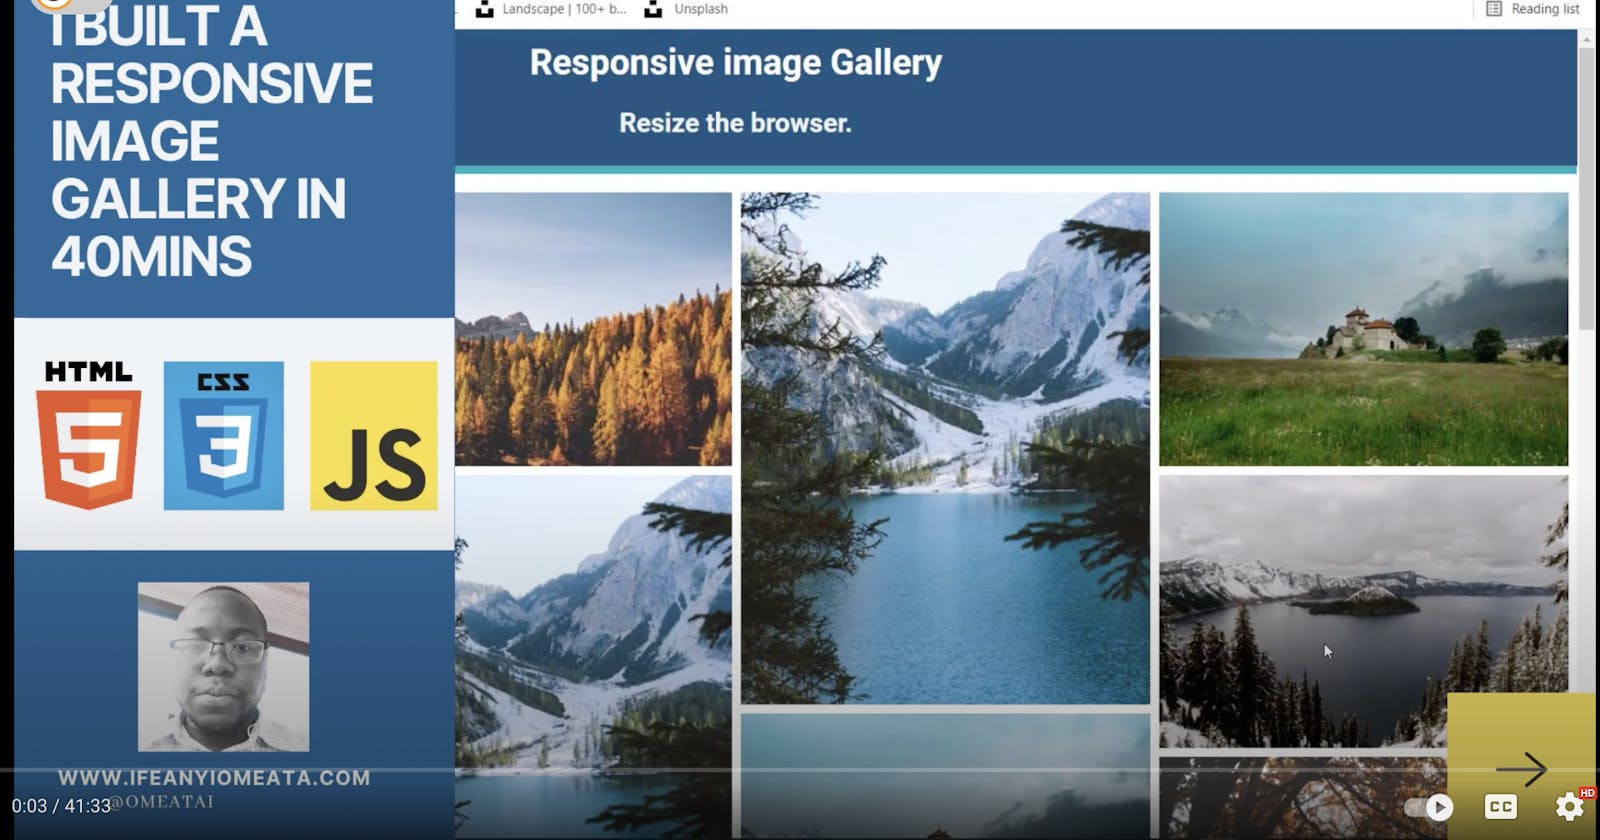 How To Build A Responsive Image Gallery